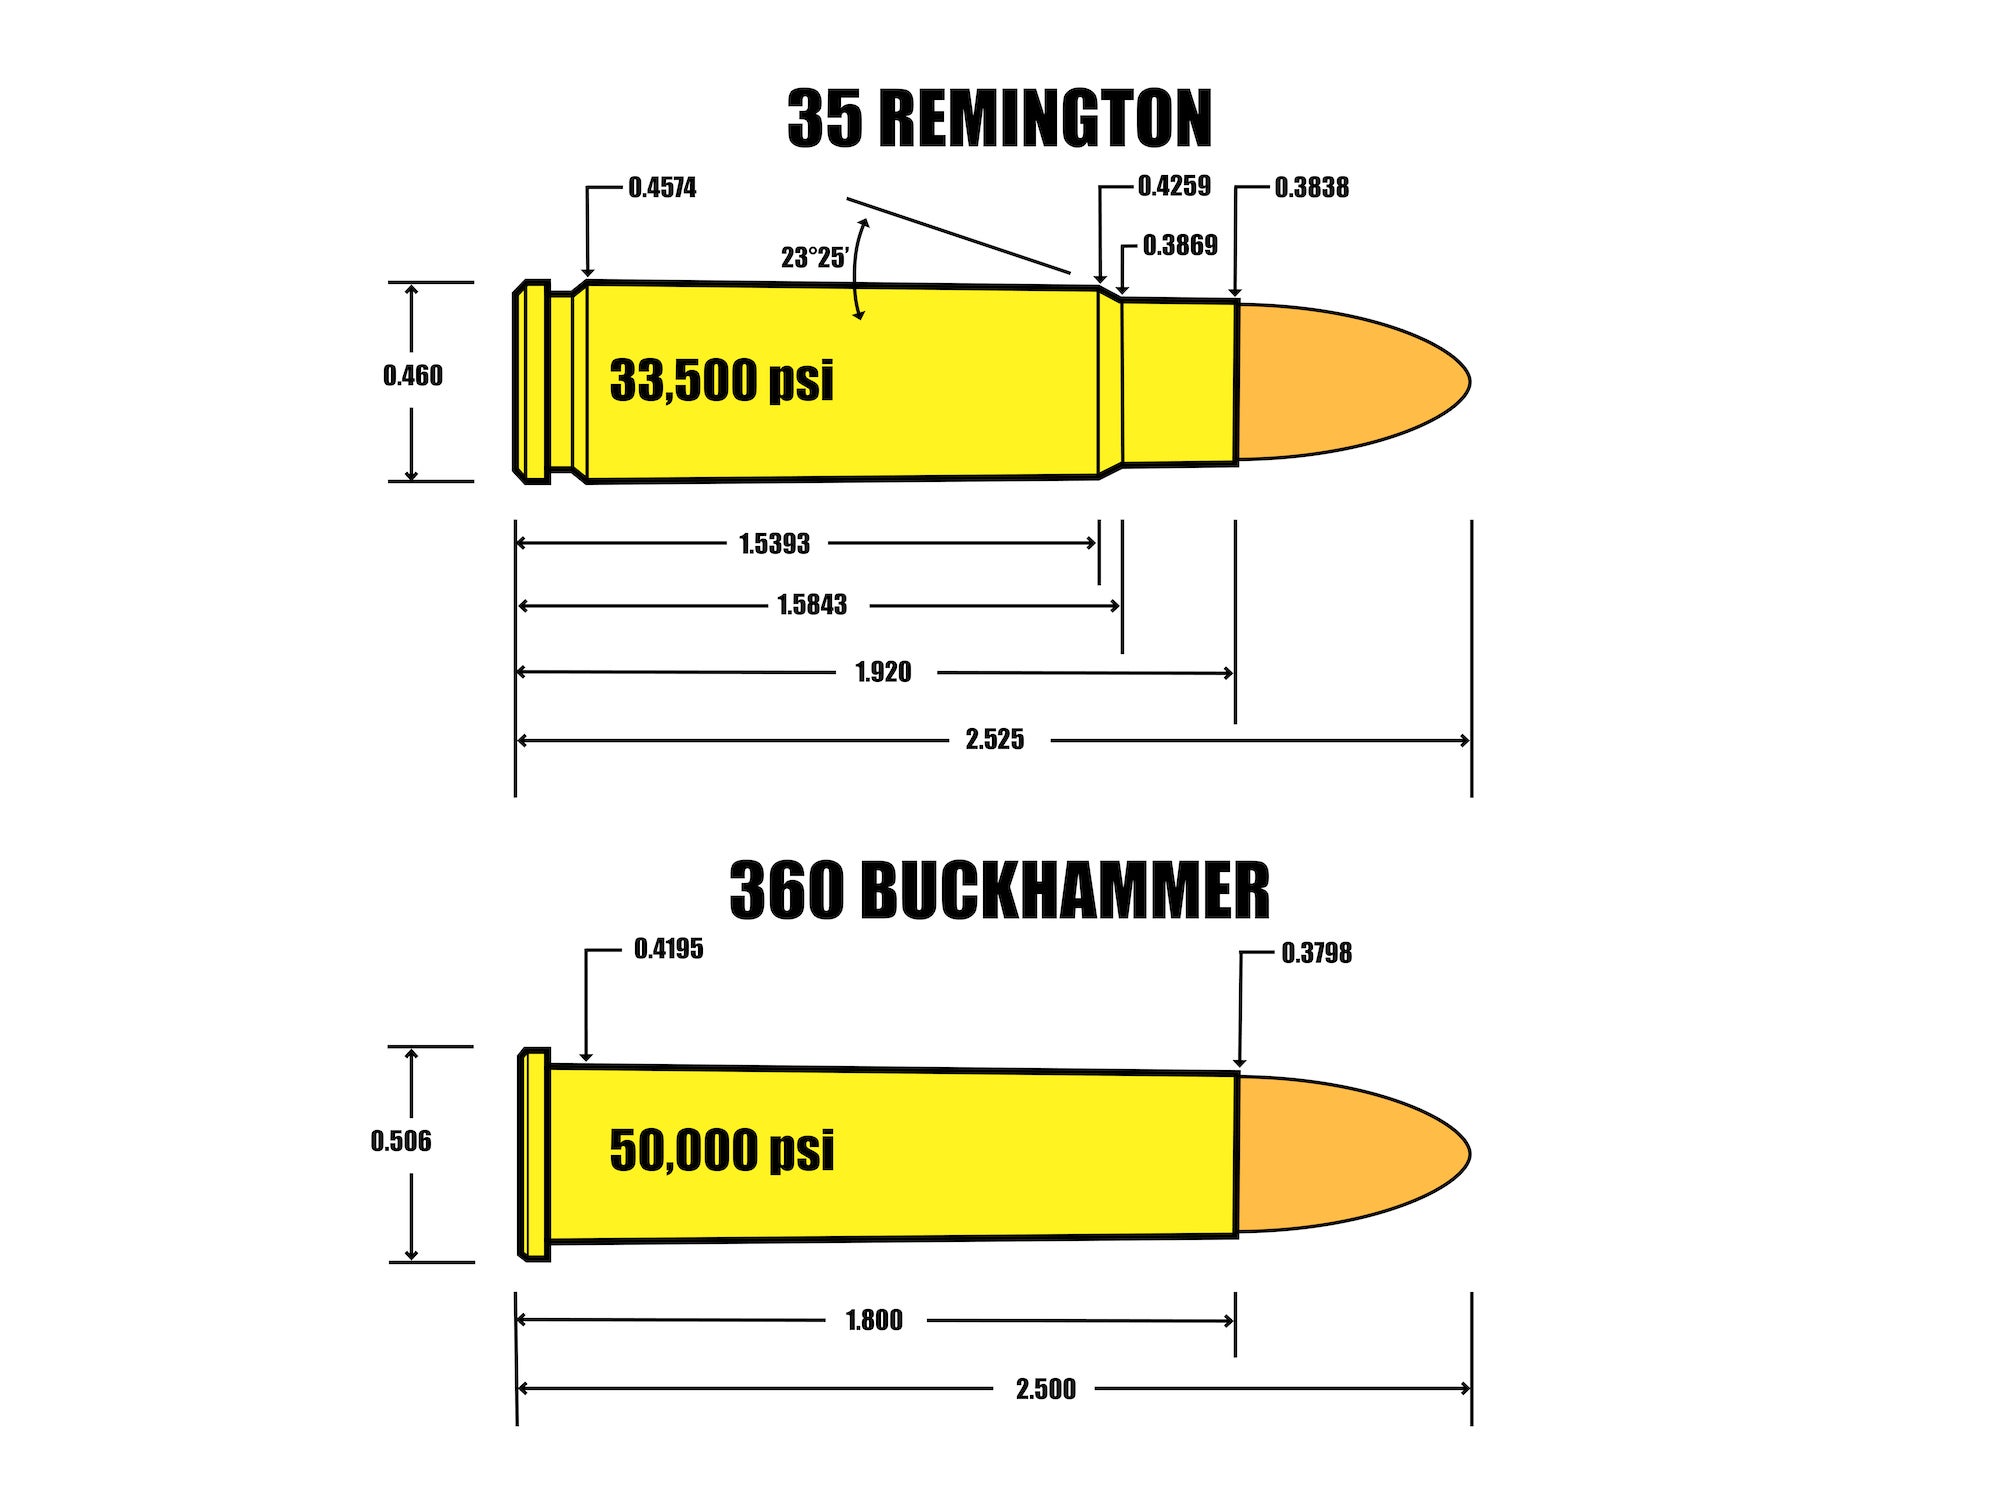 An illustration comparing the 35 Remington to the 360 Buckhammer.